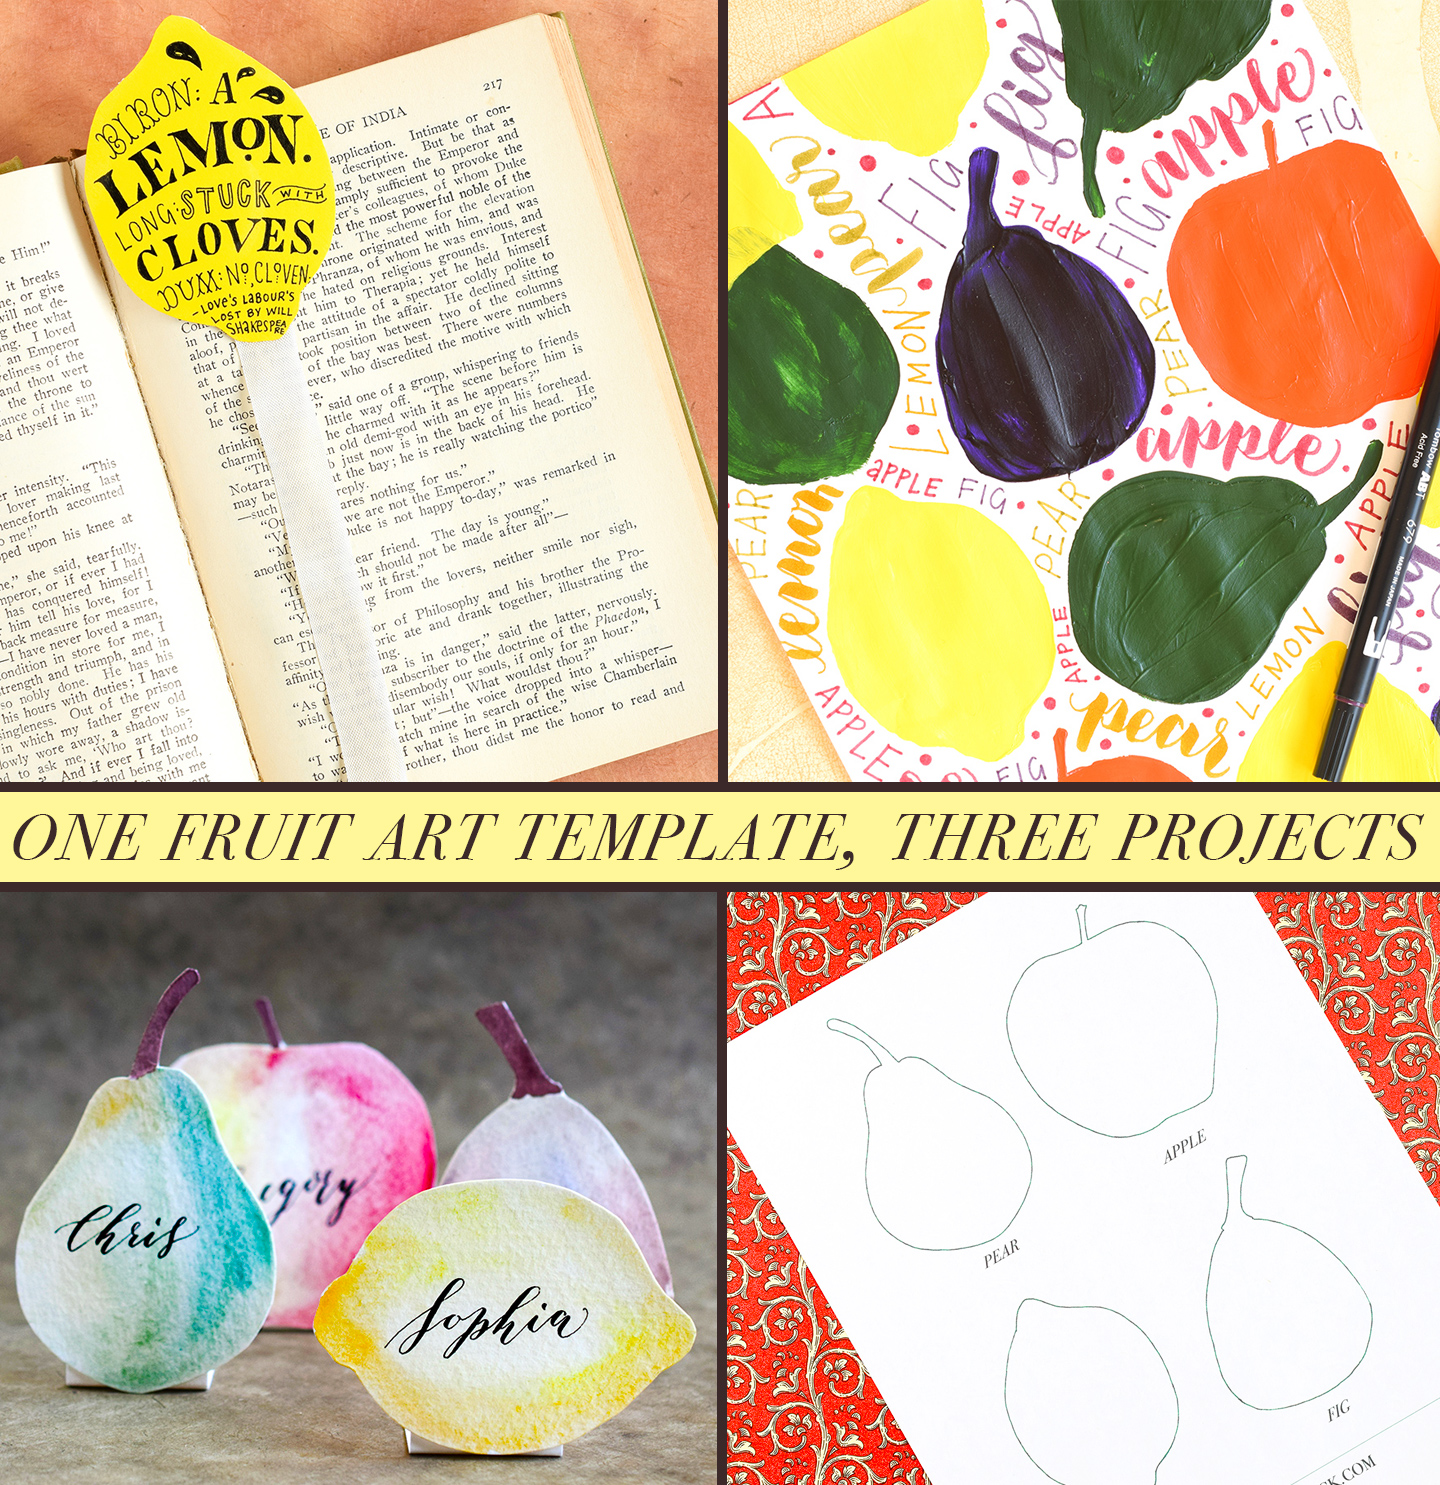 One Fruit Art Template, Three Projects